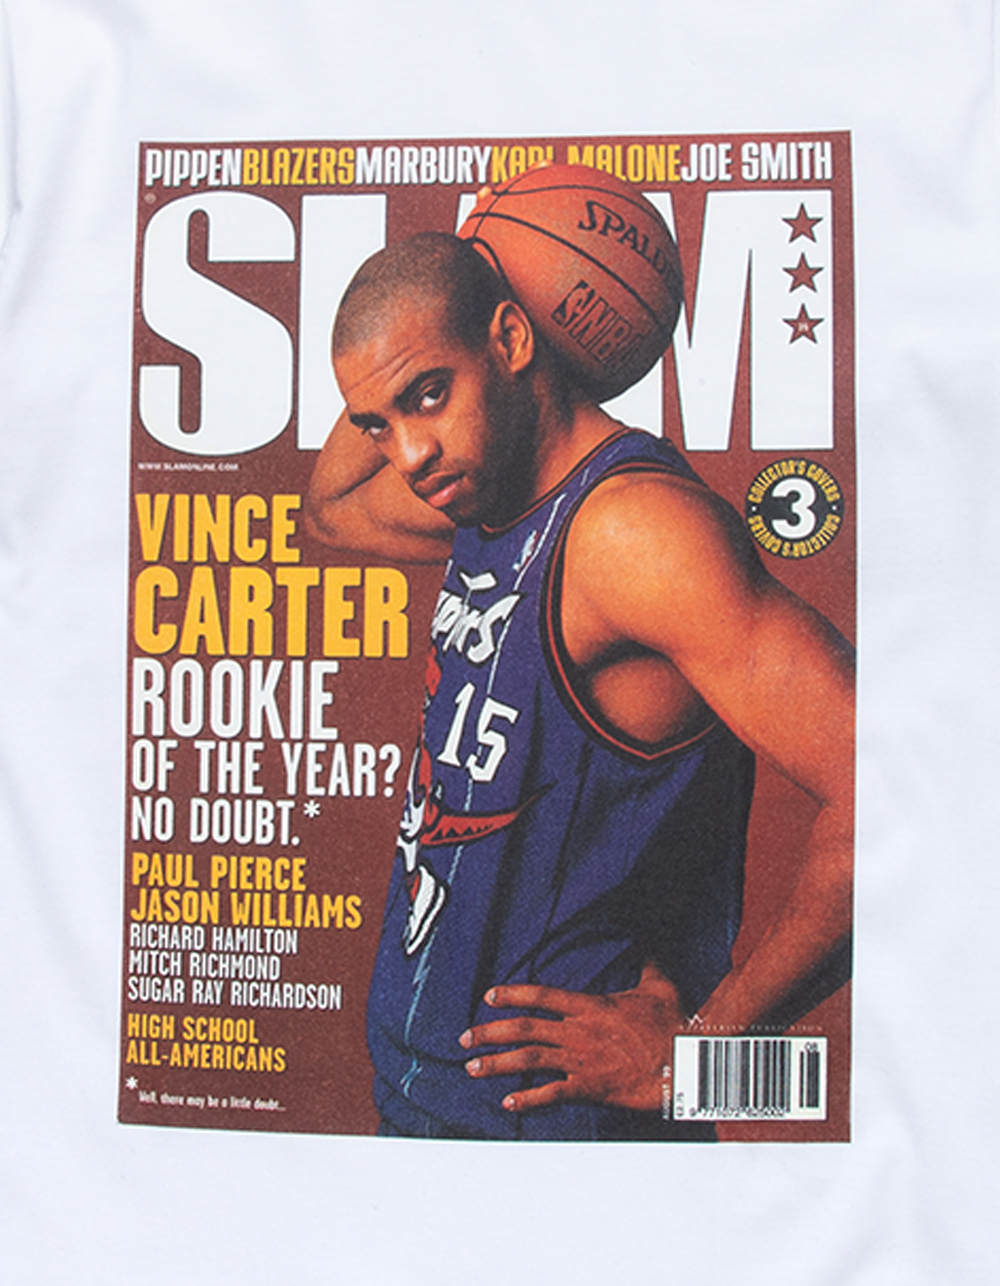 Vince Carter Rookie Of The Year SLAM Cover shirt, hoodie, sweater